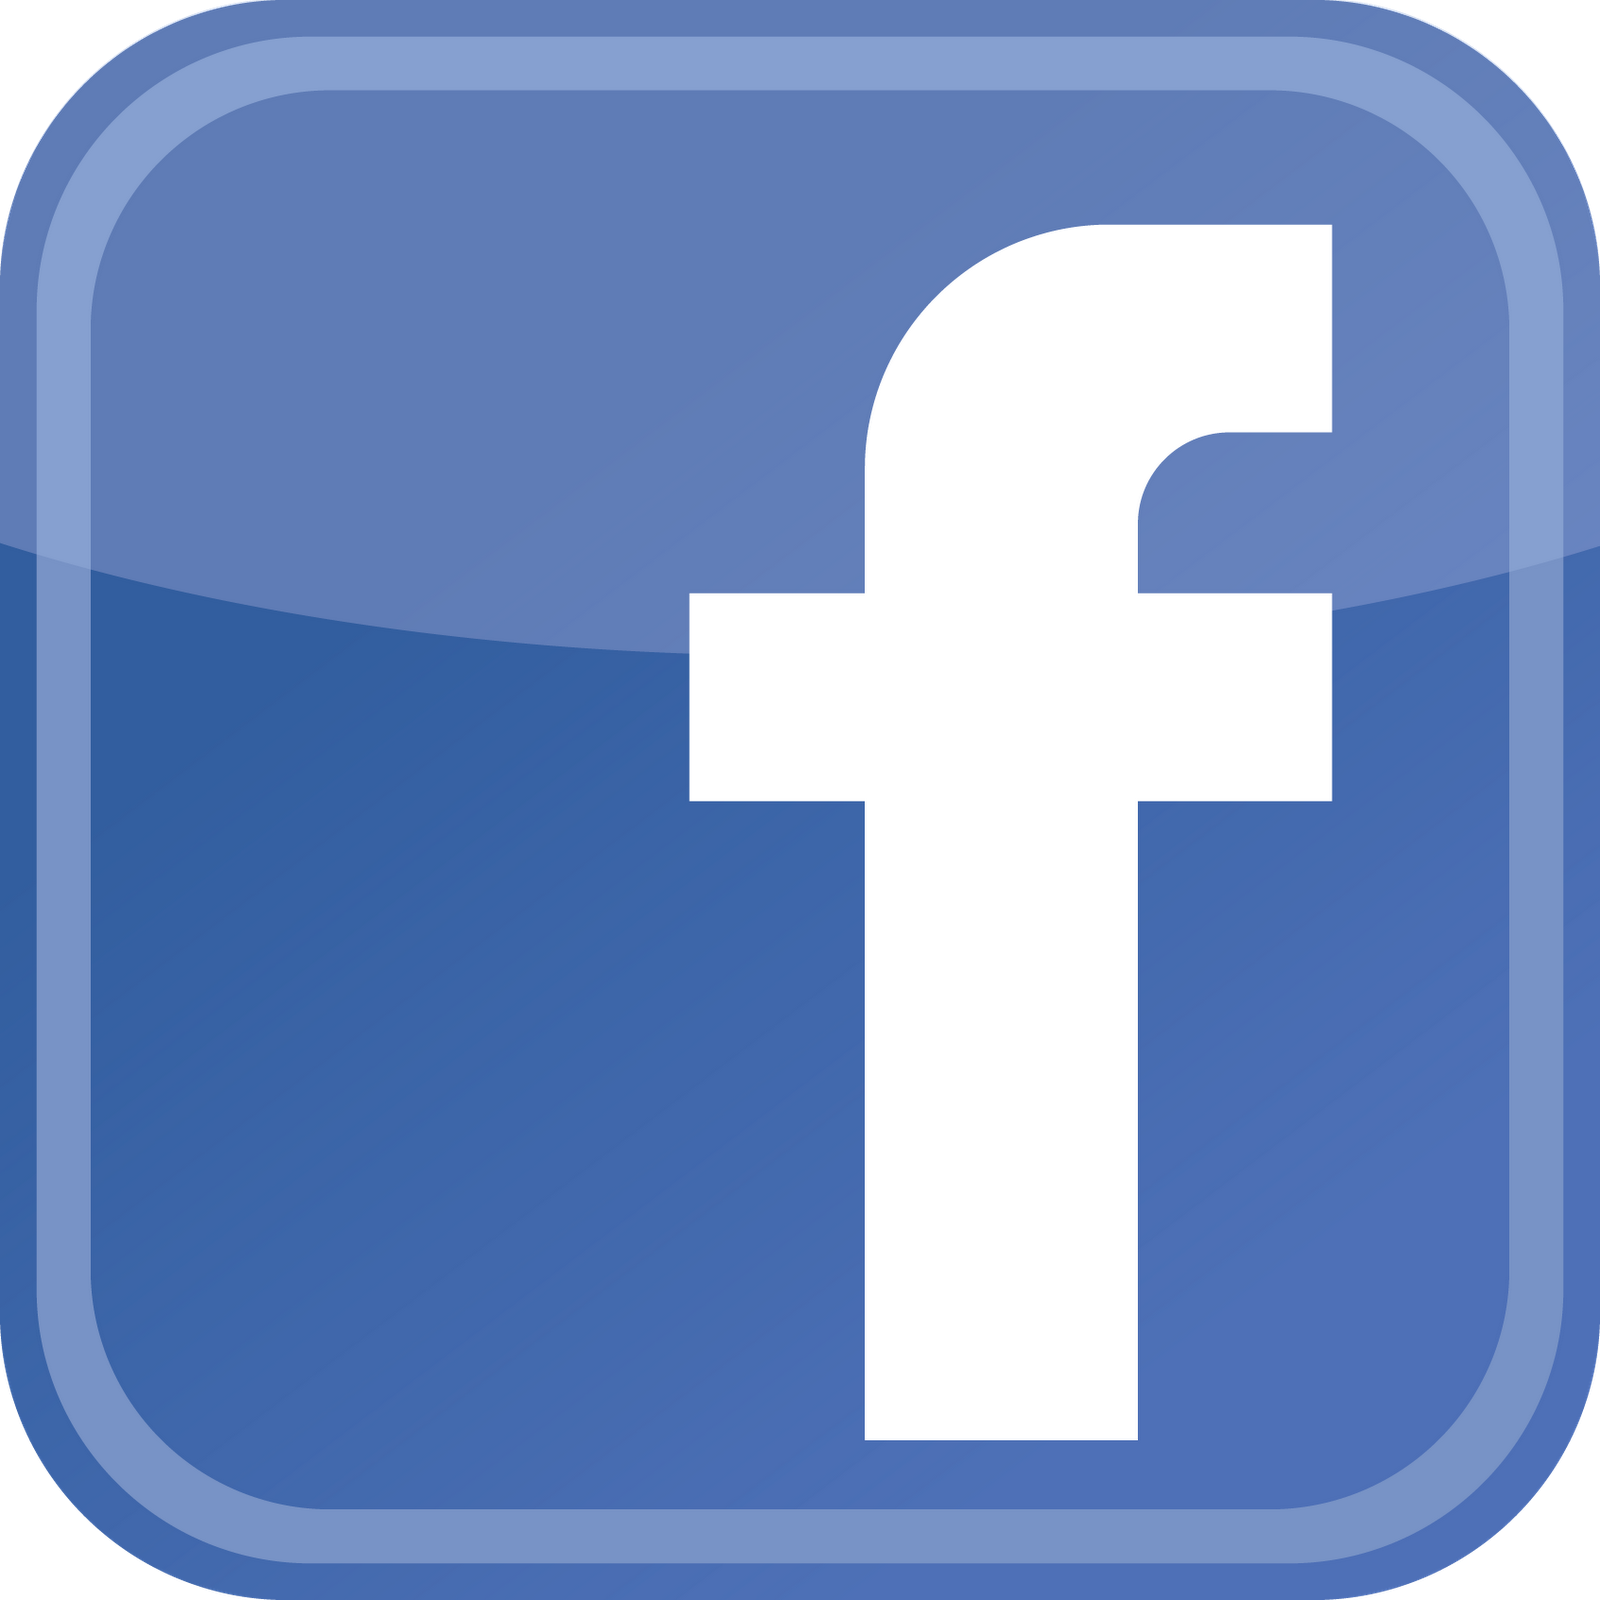 facebook_icon.png - 432.77 KB